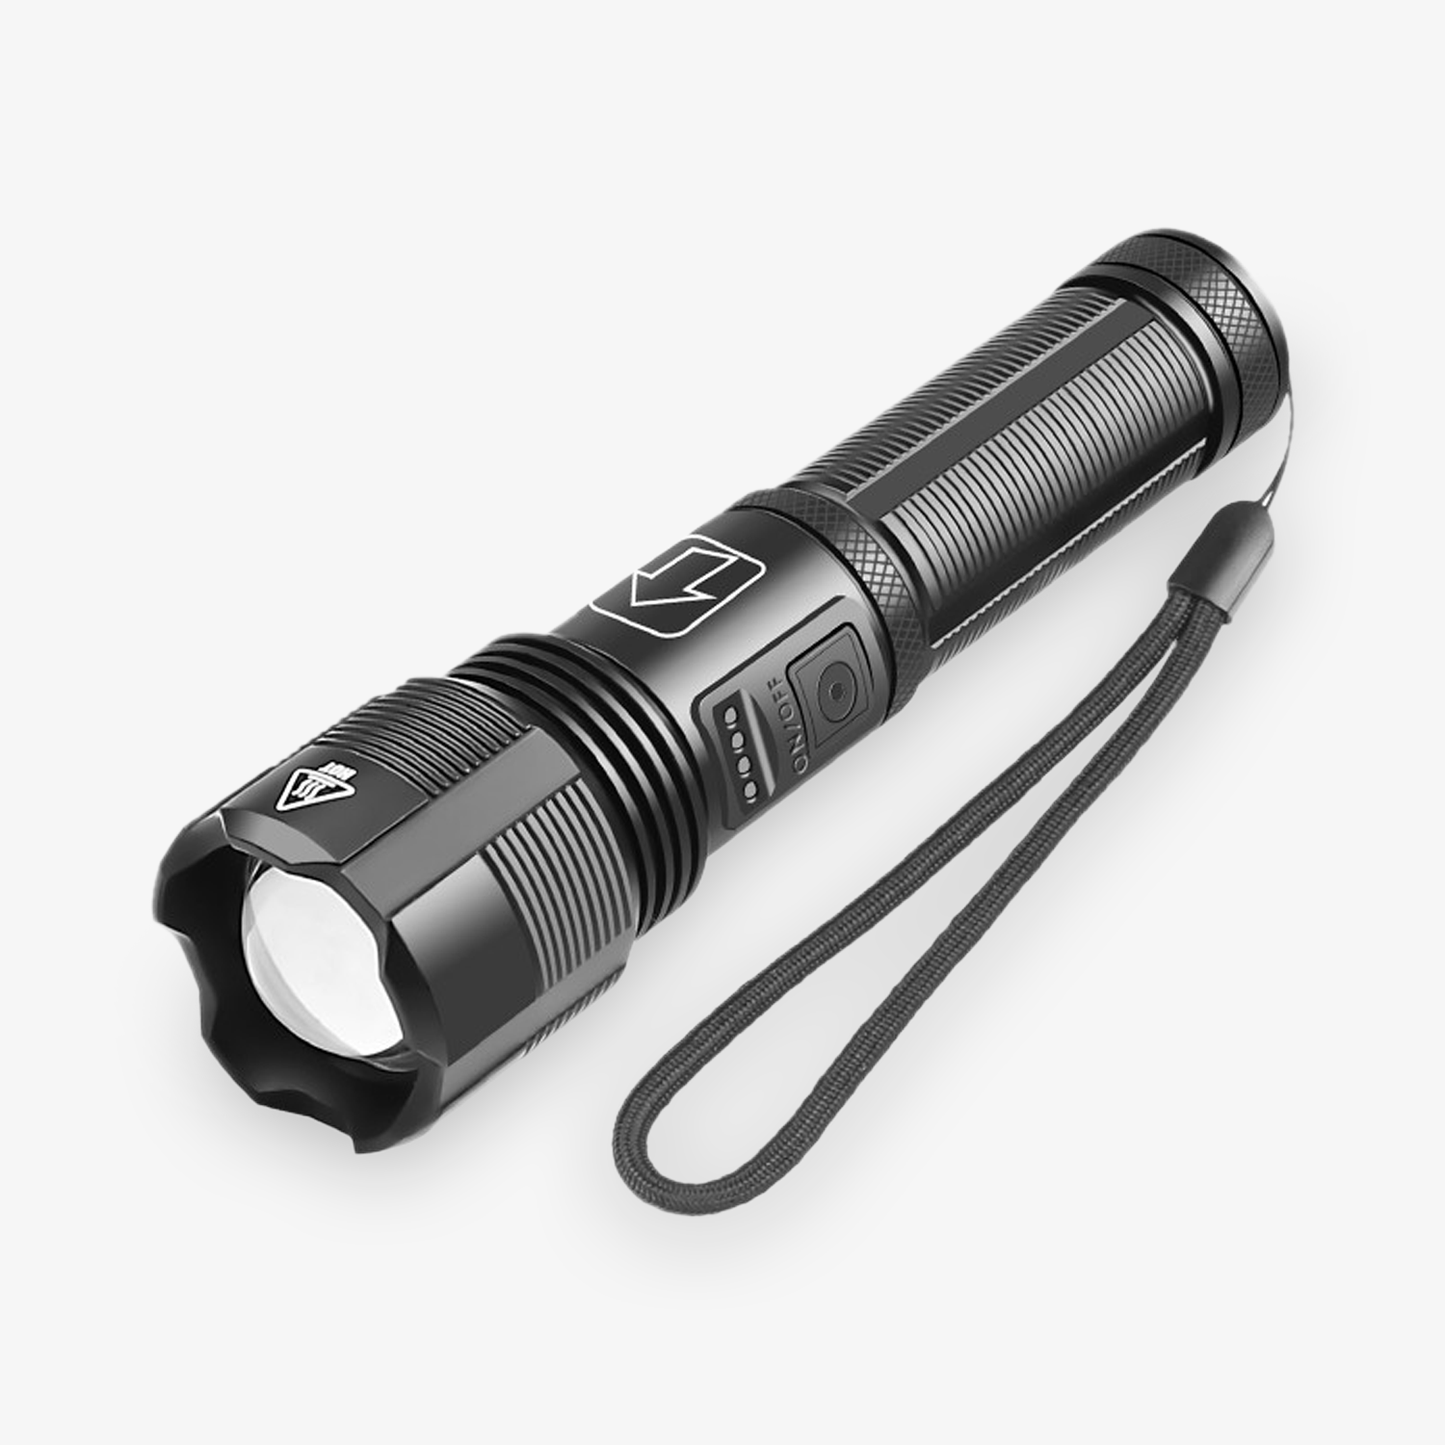 Rechargeable USB LED Zoomable Flashlight, 3000 lumens, Li-ion 18650 Battery